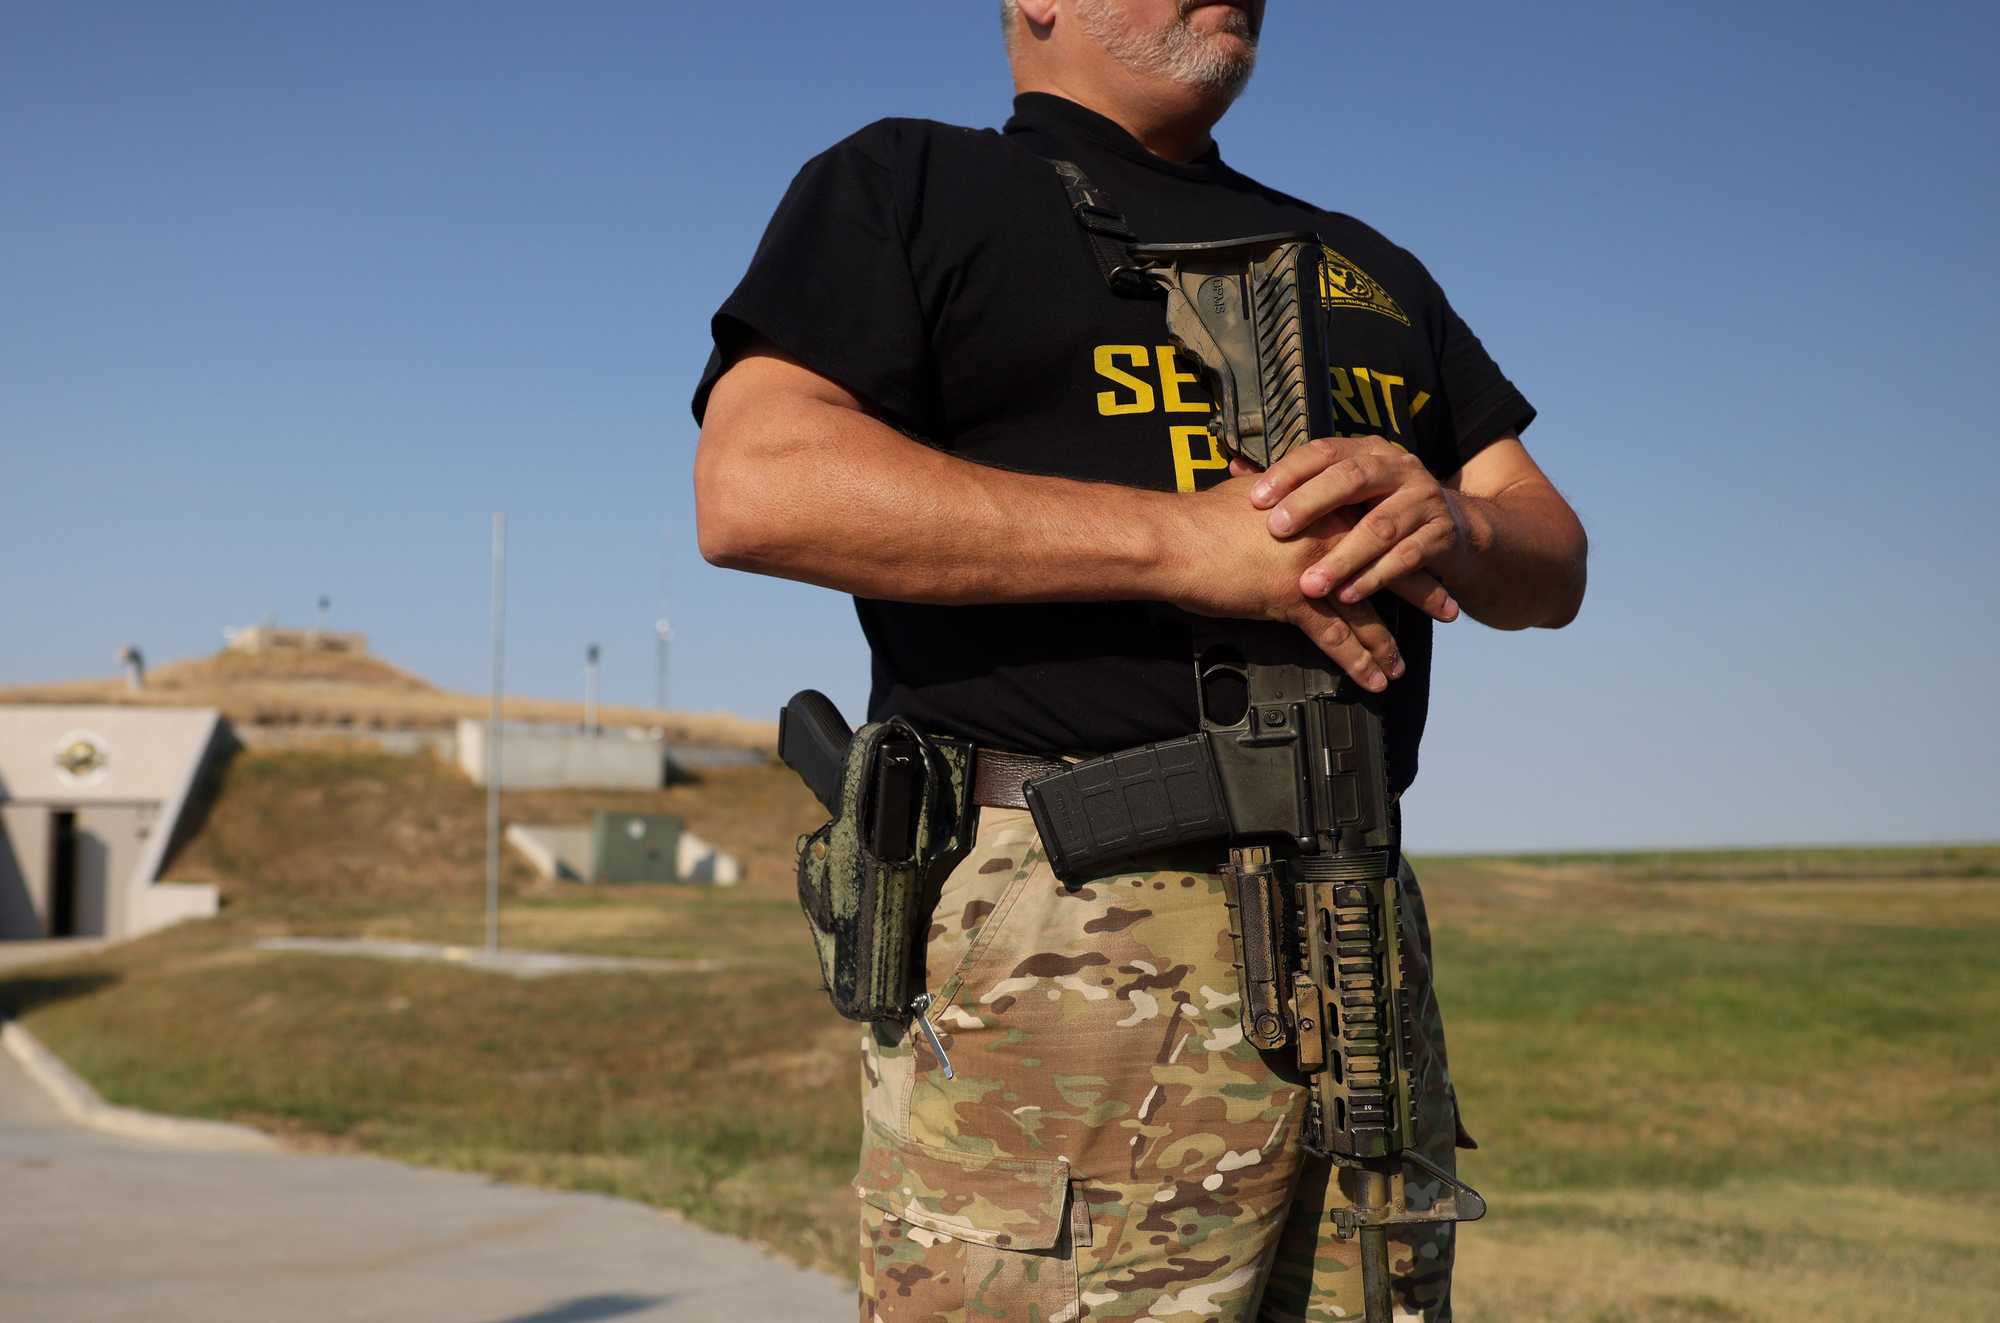 An armed guard on duty outside the Survival Condo in Kansas.